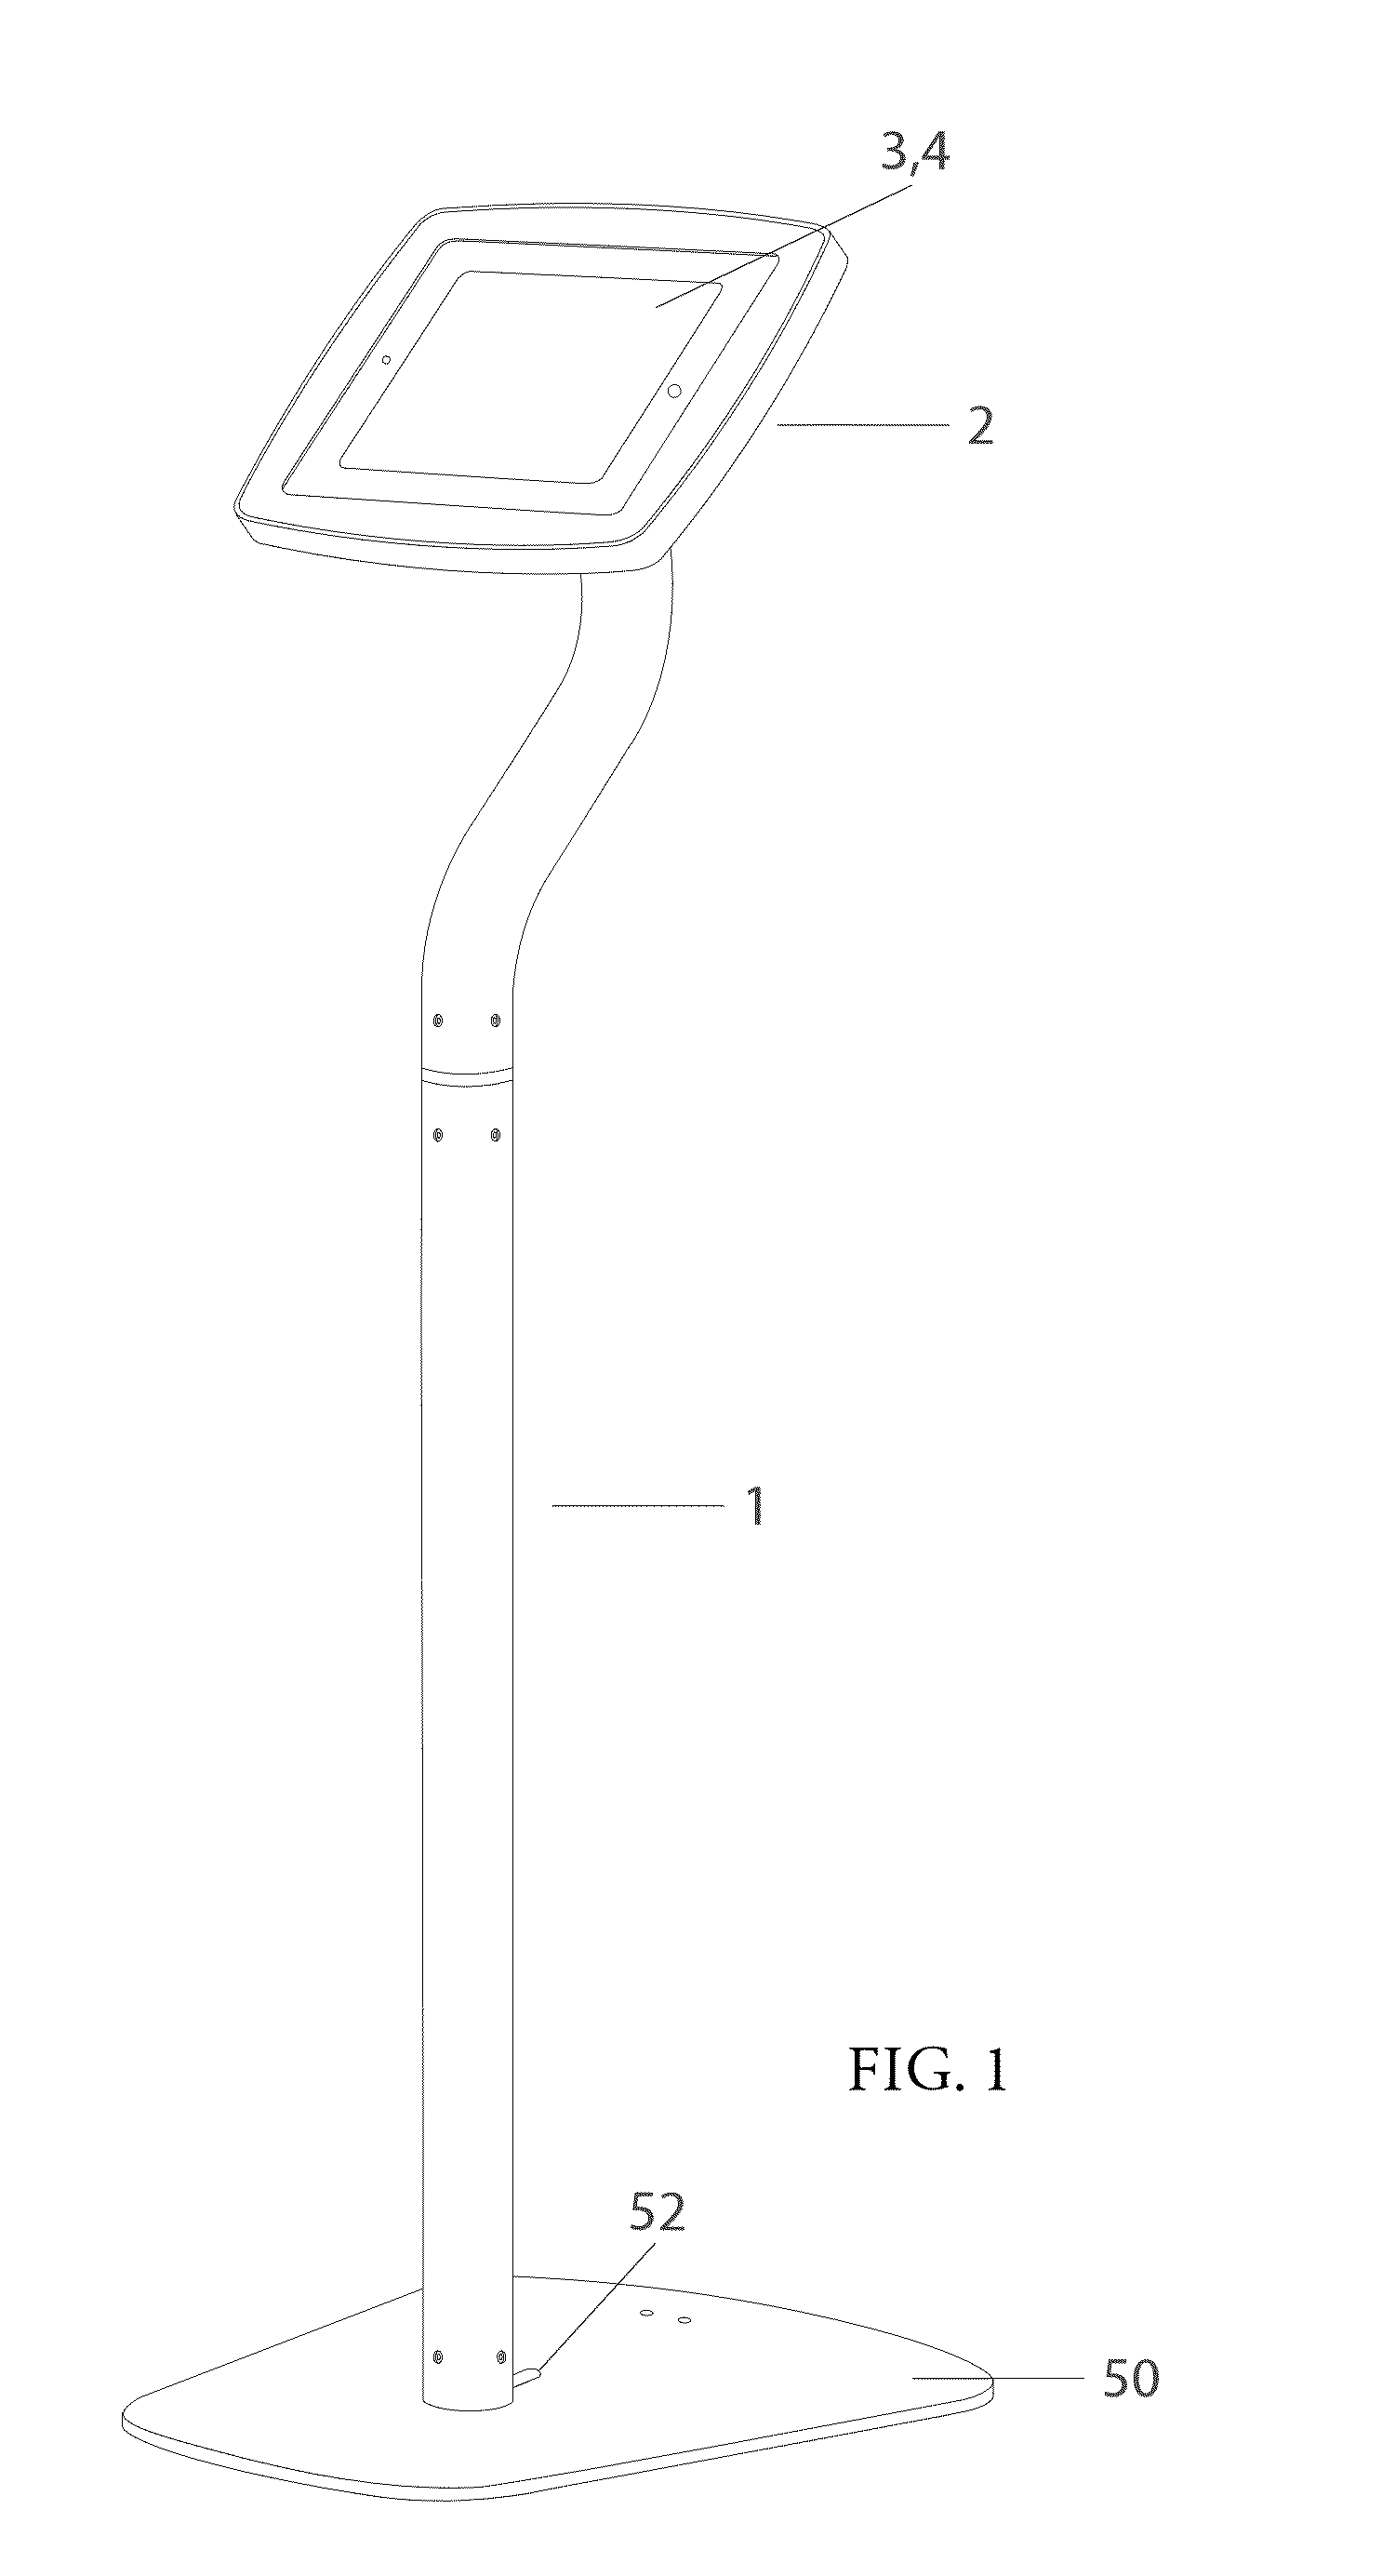 Device holder assembly and display stand assembly for tablet computers or the like